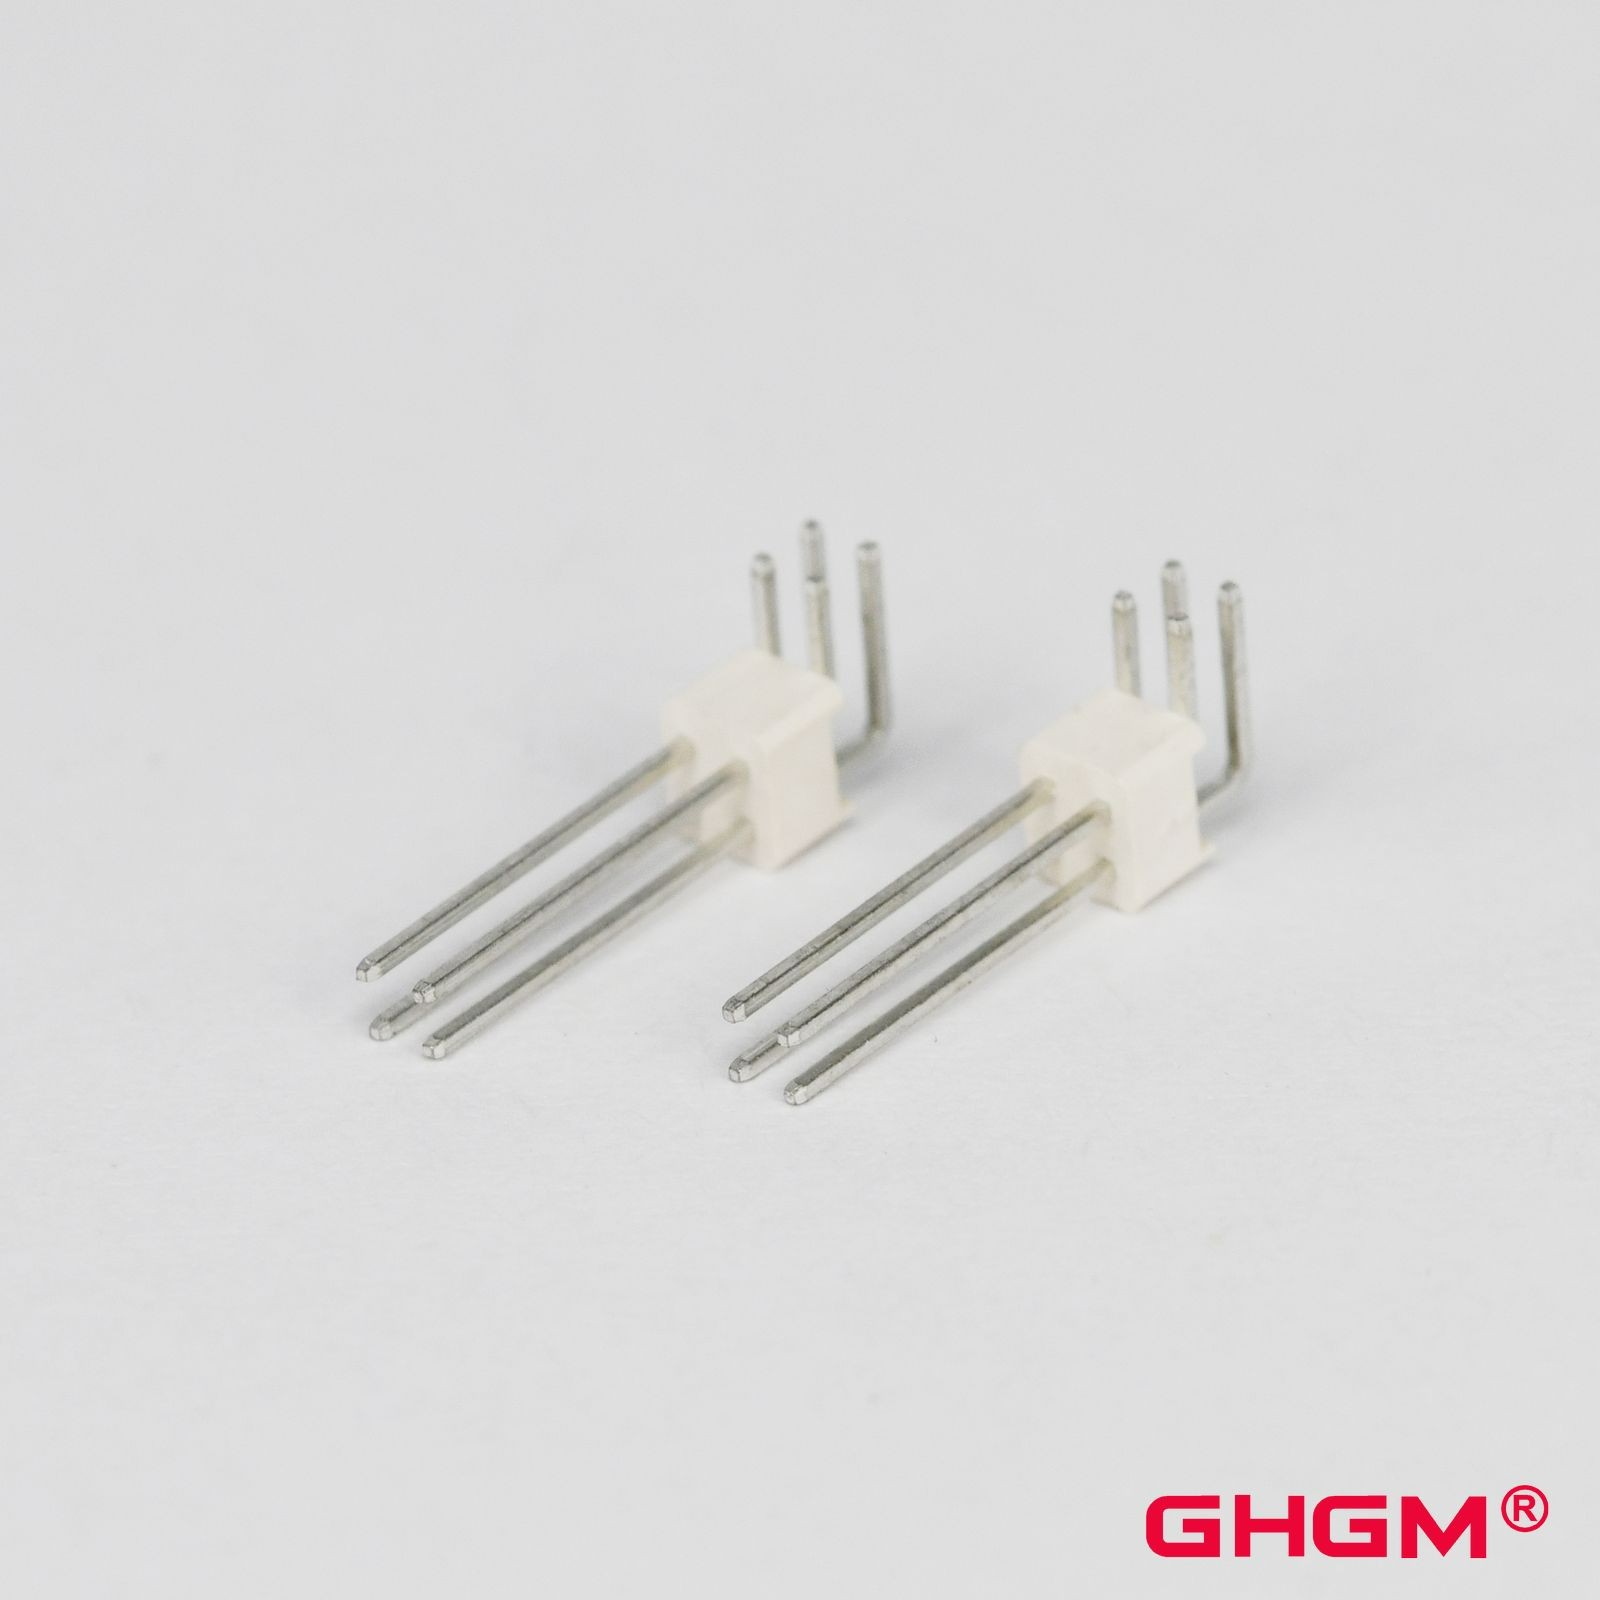 G15 M2059 Pitch 1.5mm Right Angle Needle Male connector, Intelligent Light Connector, smart light connector, male connector